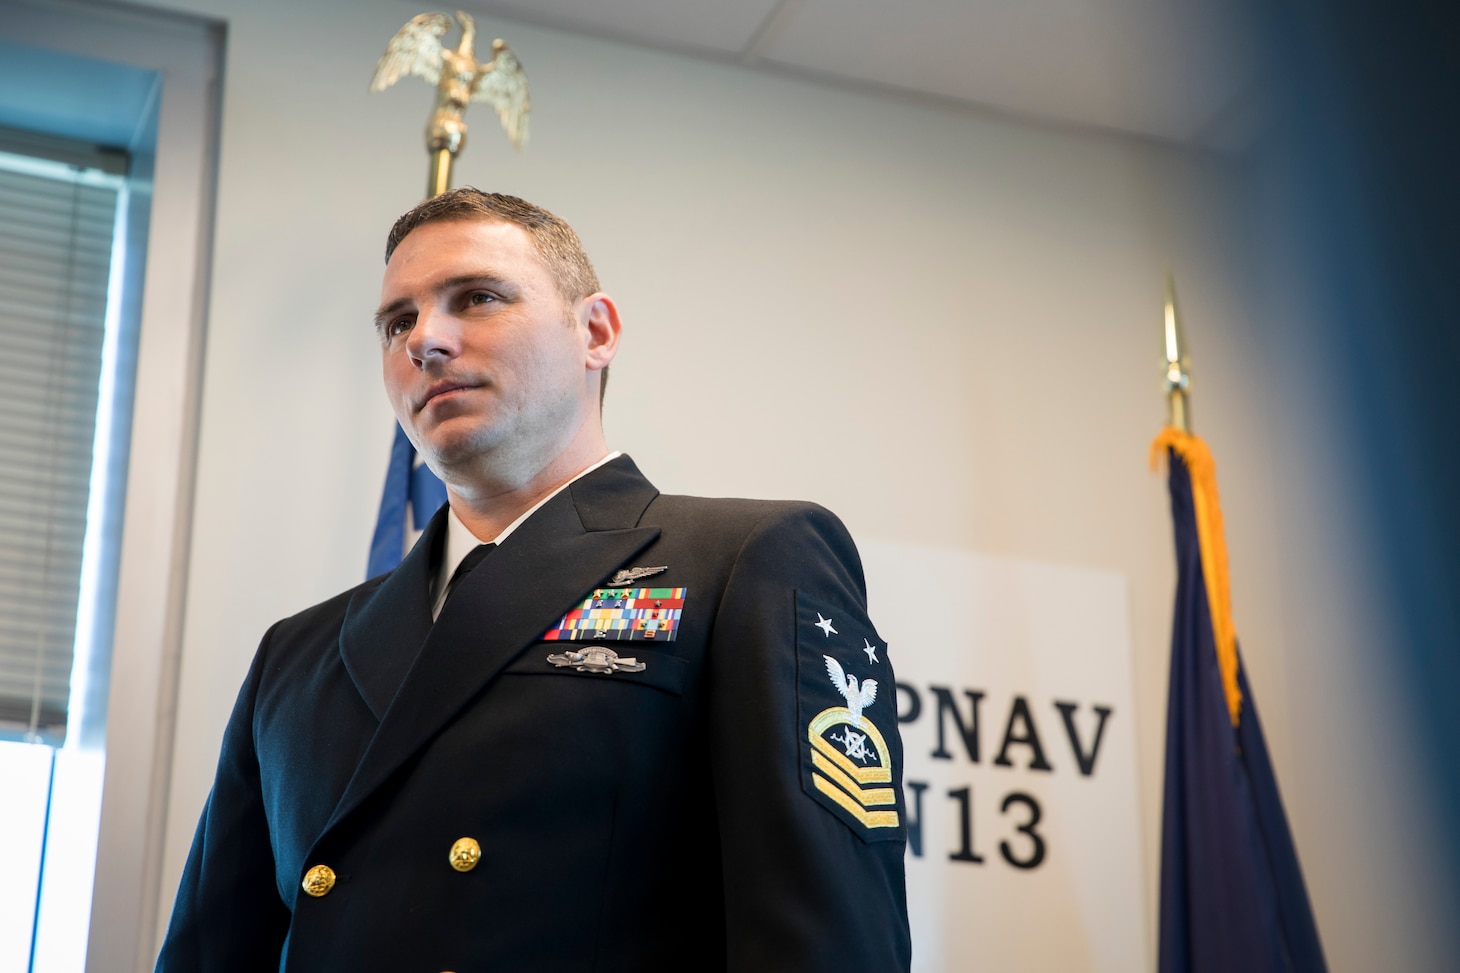 Navy Master Chief Petty Officer wears service dress blues in the Navy's N13 office, highlighting the Robotics Warfare Specialist rating badge